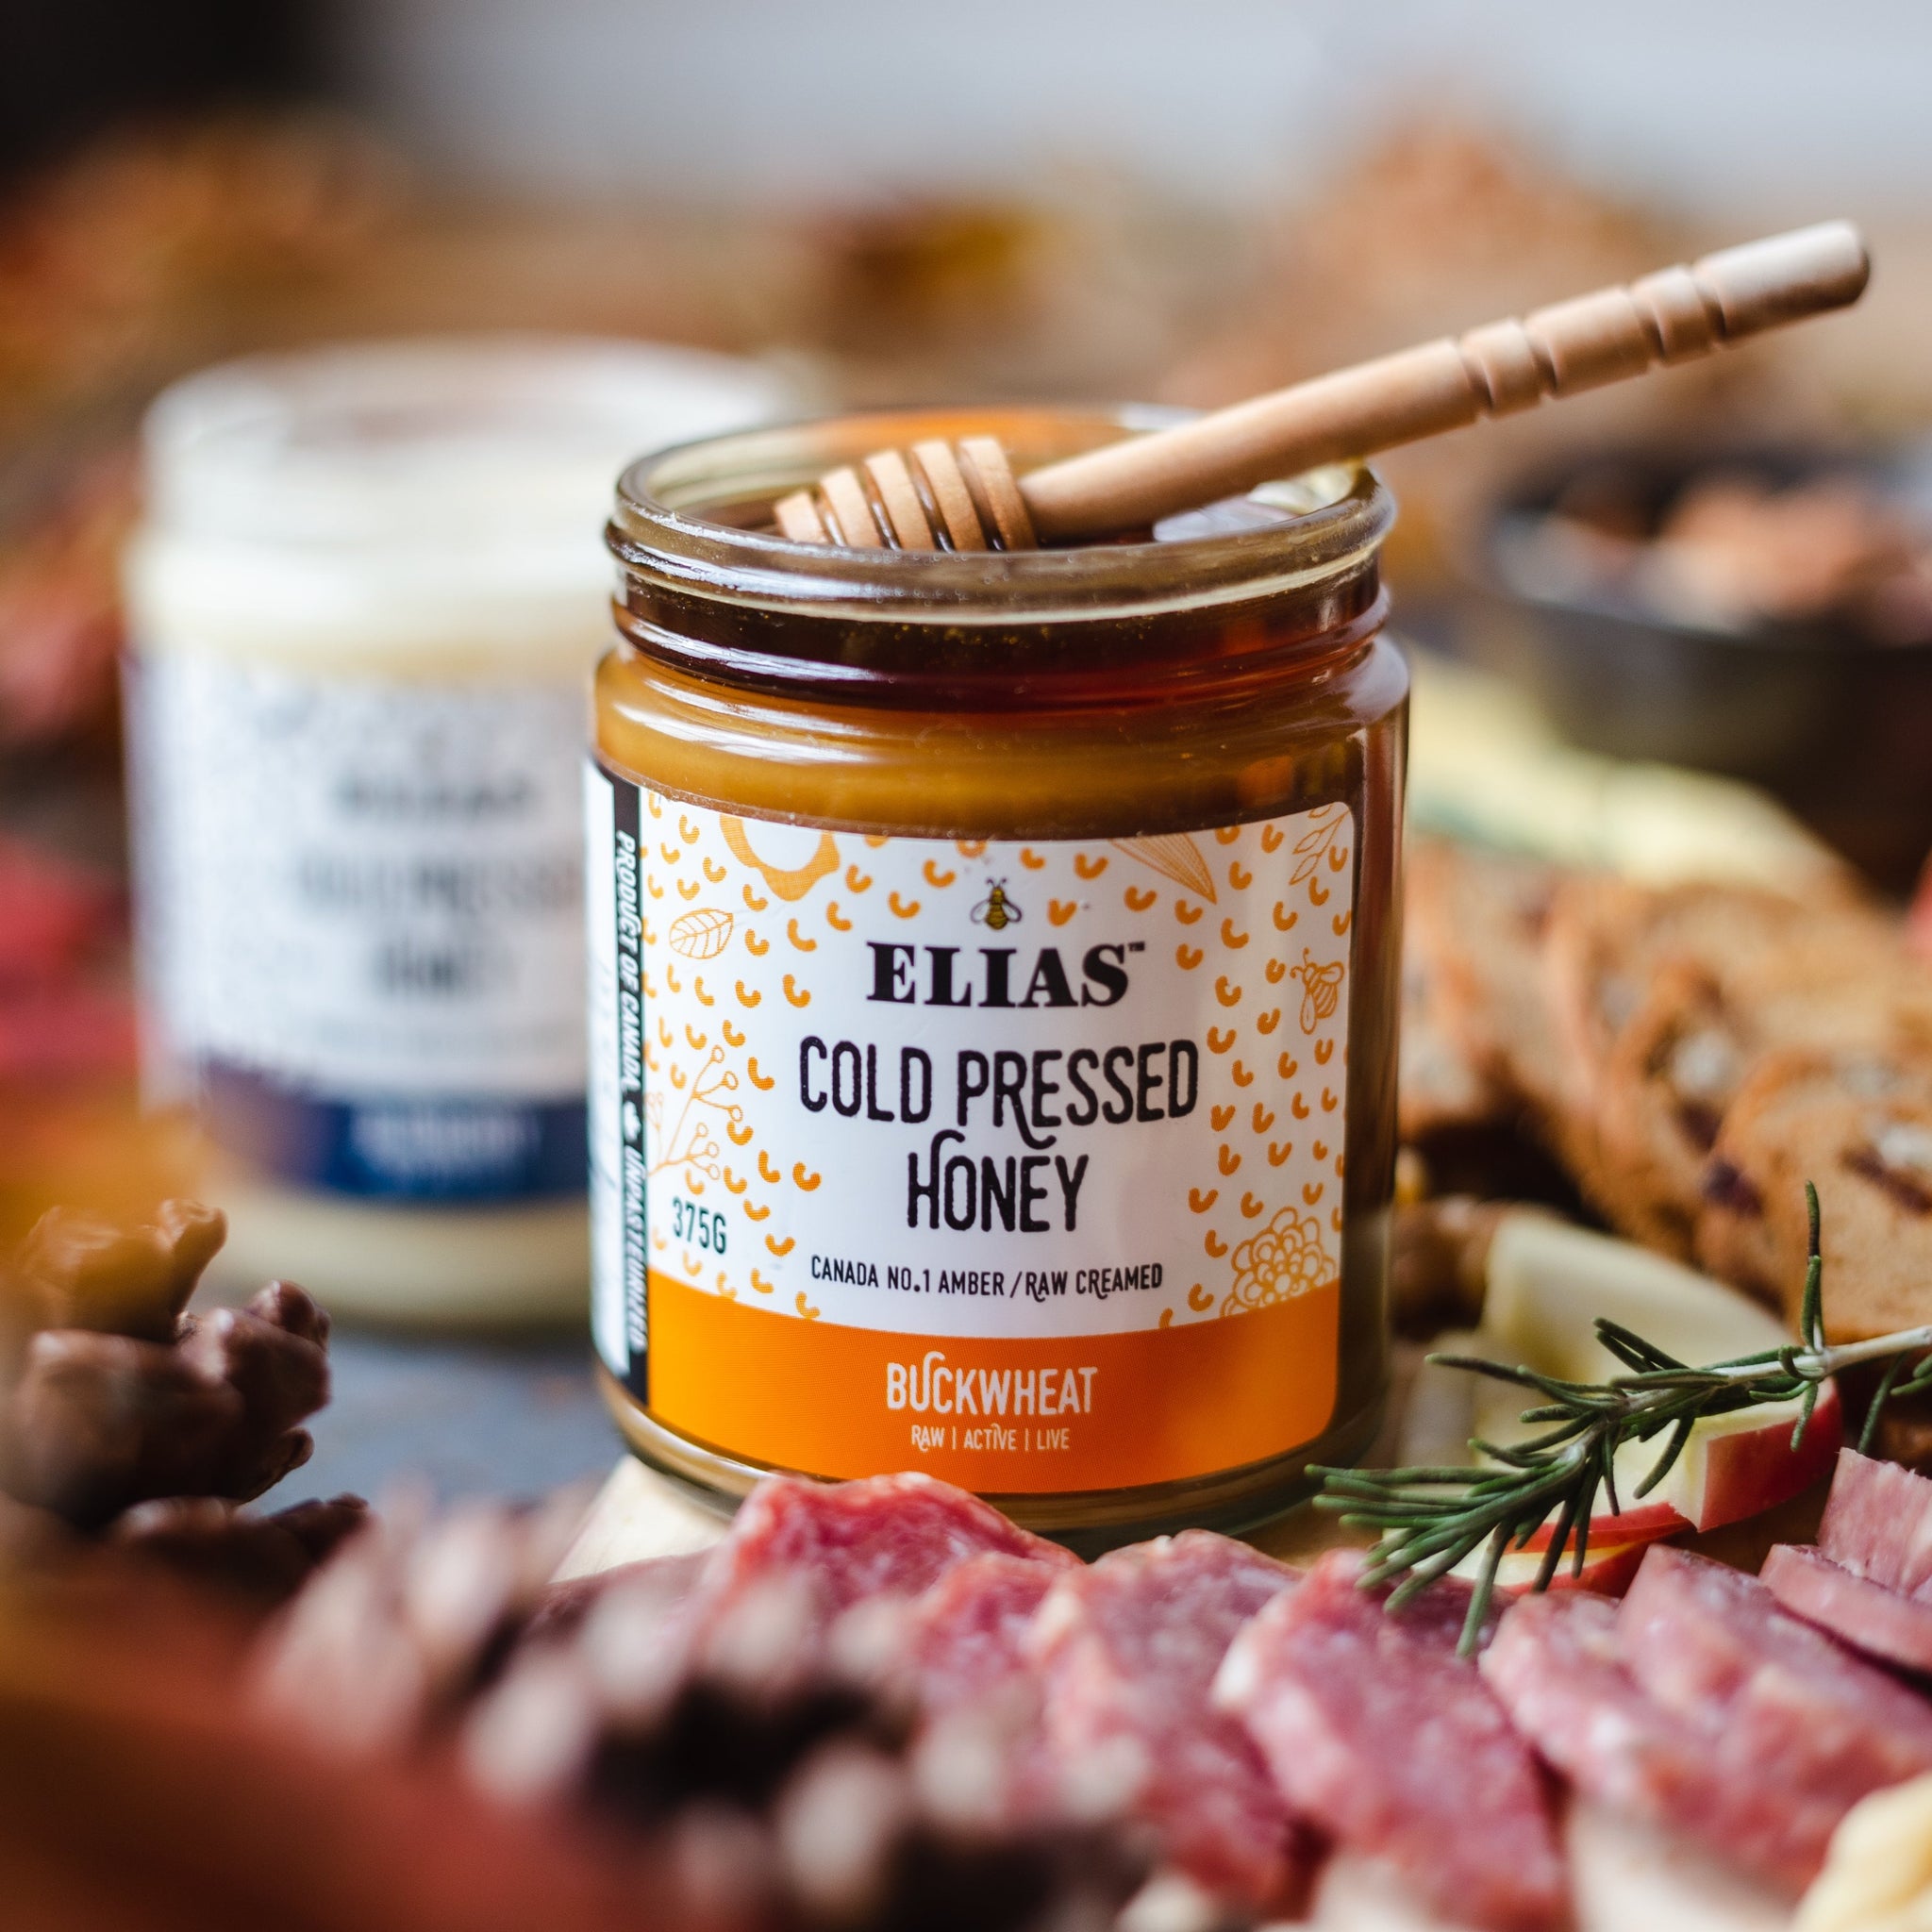 Elias Cold Pressed Buckwheat Honey in a charcuterie board